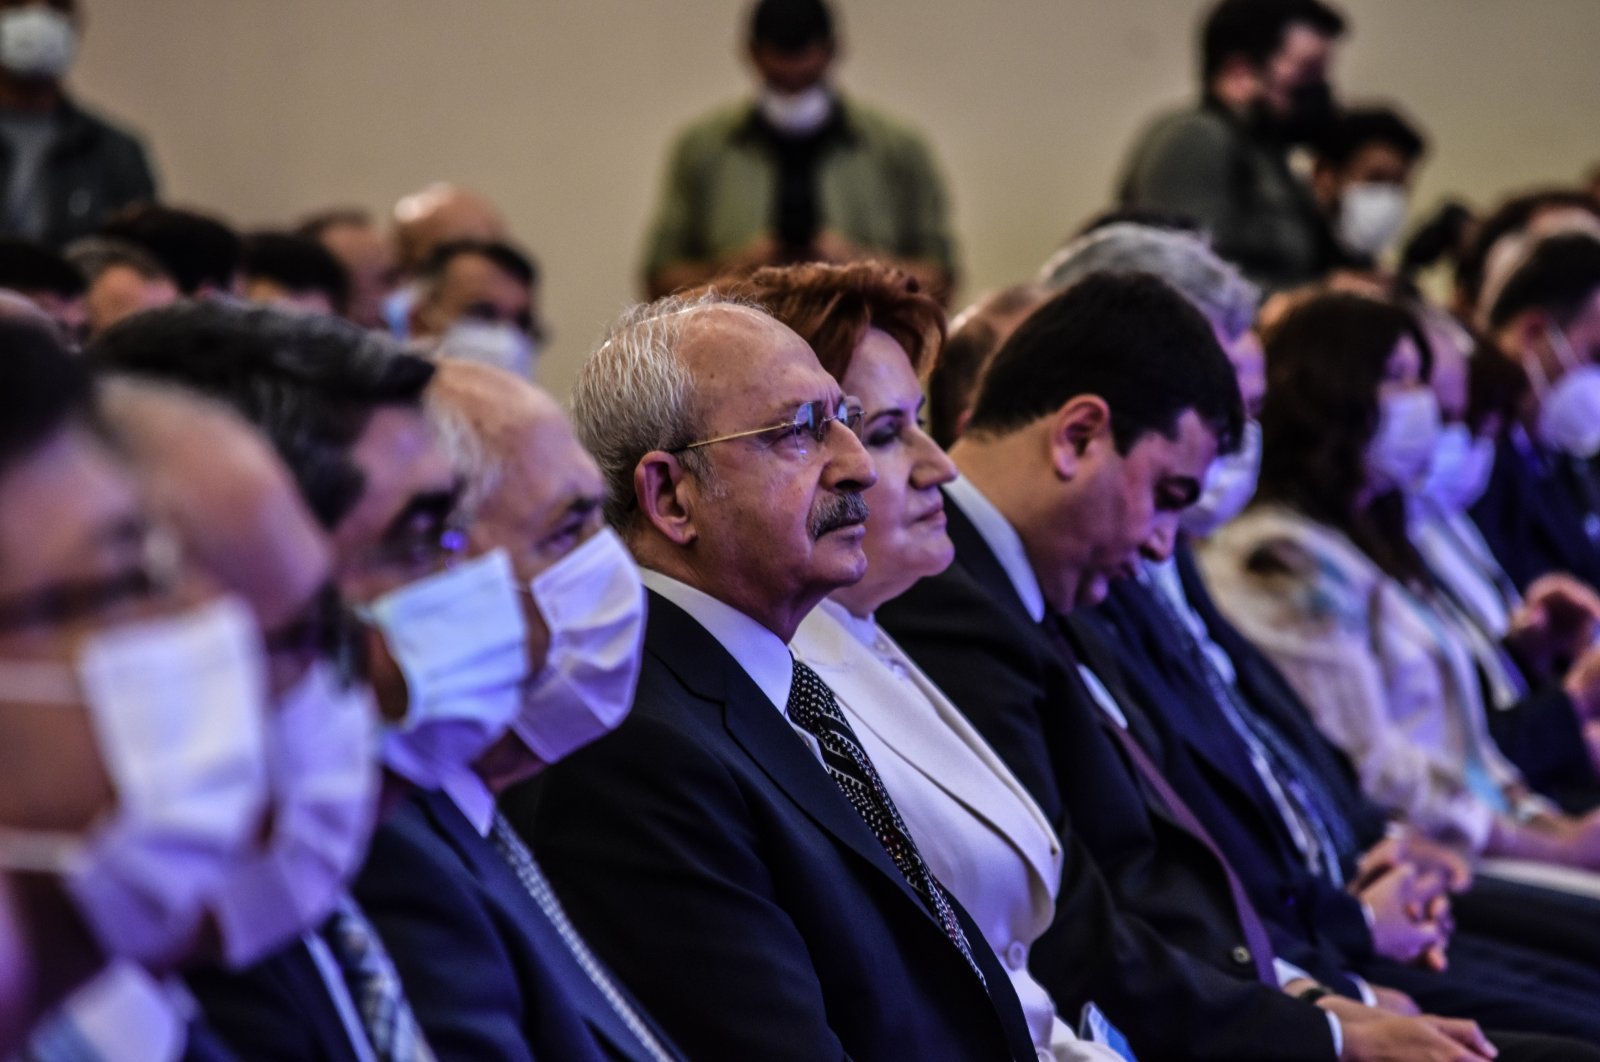 Main opposition Republican People's Party (CHP) Chairperson Kemal Kılıçdaroğlu (5rd L) and Good Party (IP) Chairperson Meral Akşener (6th L) at an event in Ankara, Turkey, June 23, 2021. (Reuters Photo)